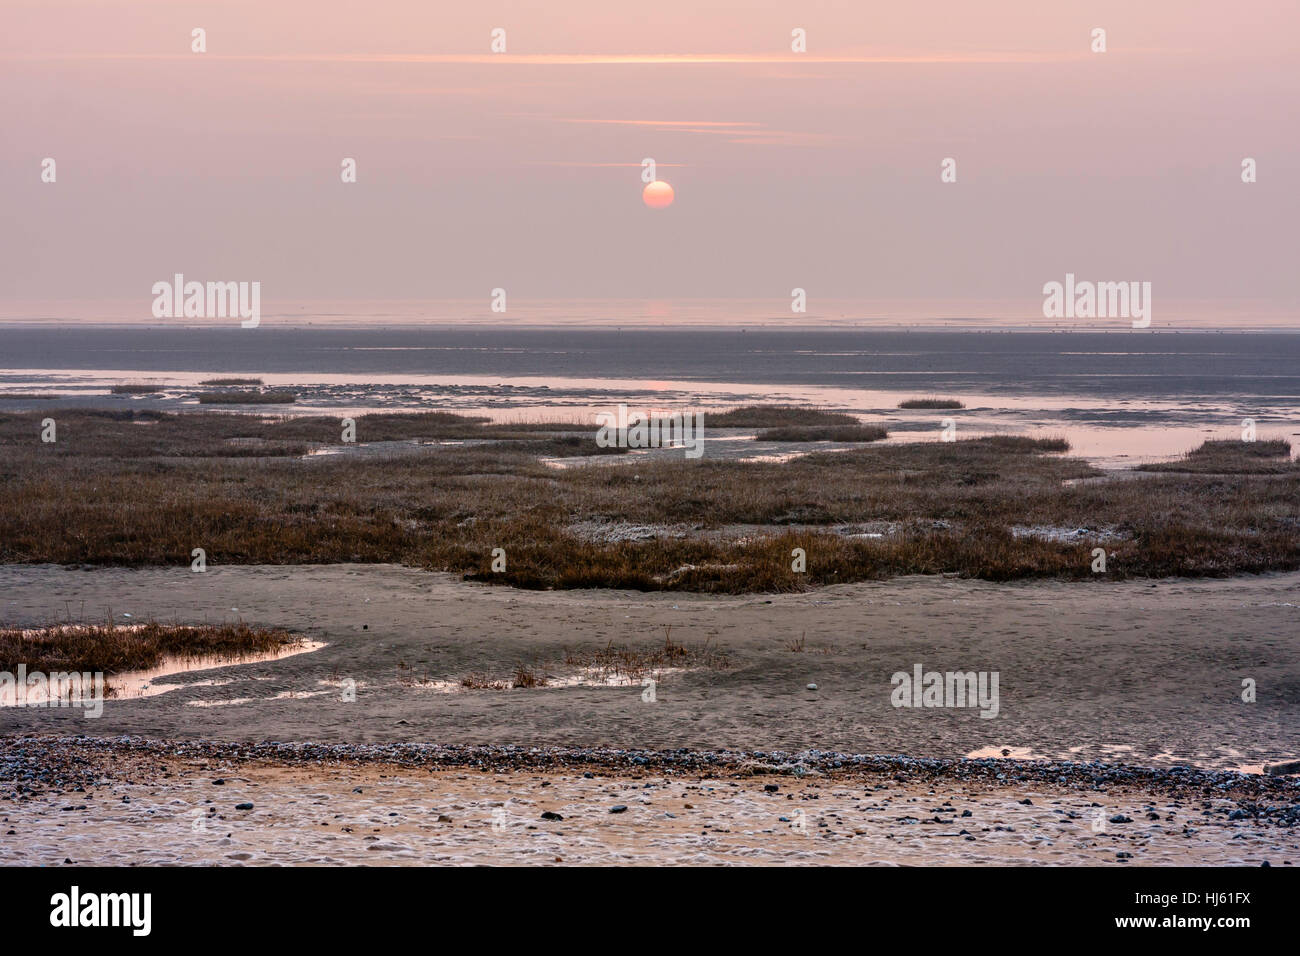 Sunrise over the English Channel at Pegwell Bay. Salt water marshes at low tide with many clumps of spartina grass growing in foreground. Hazy sky. Stock Photo